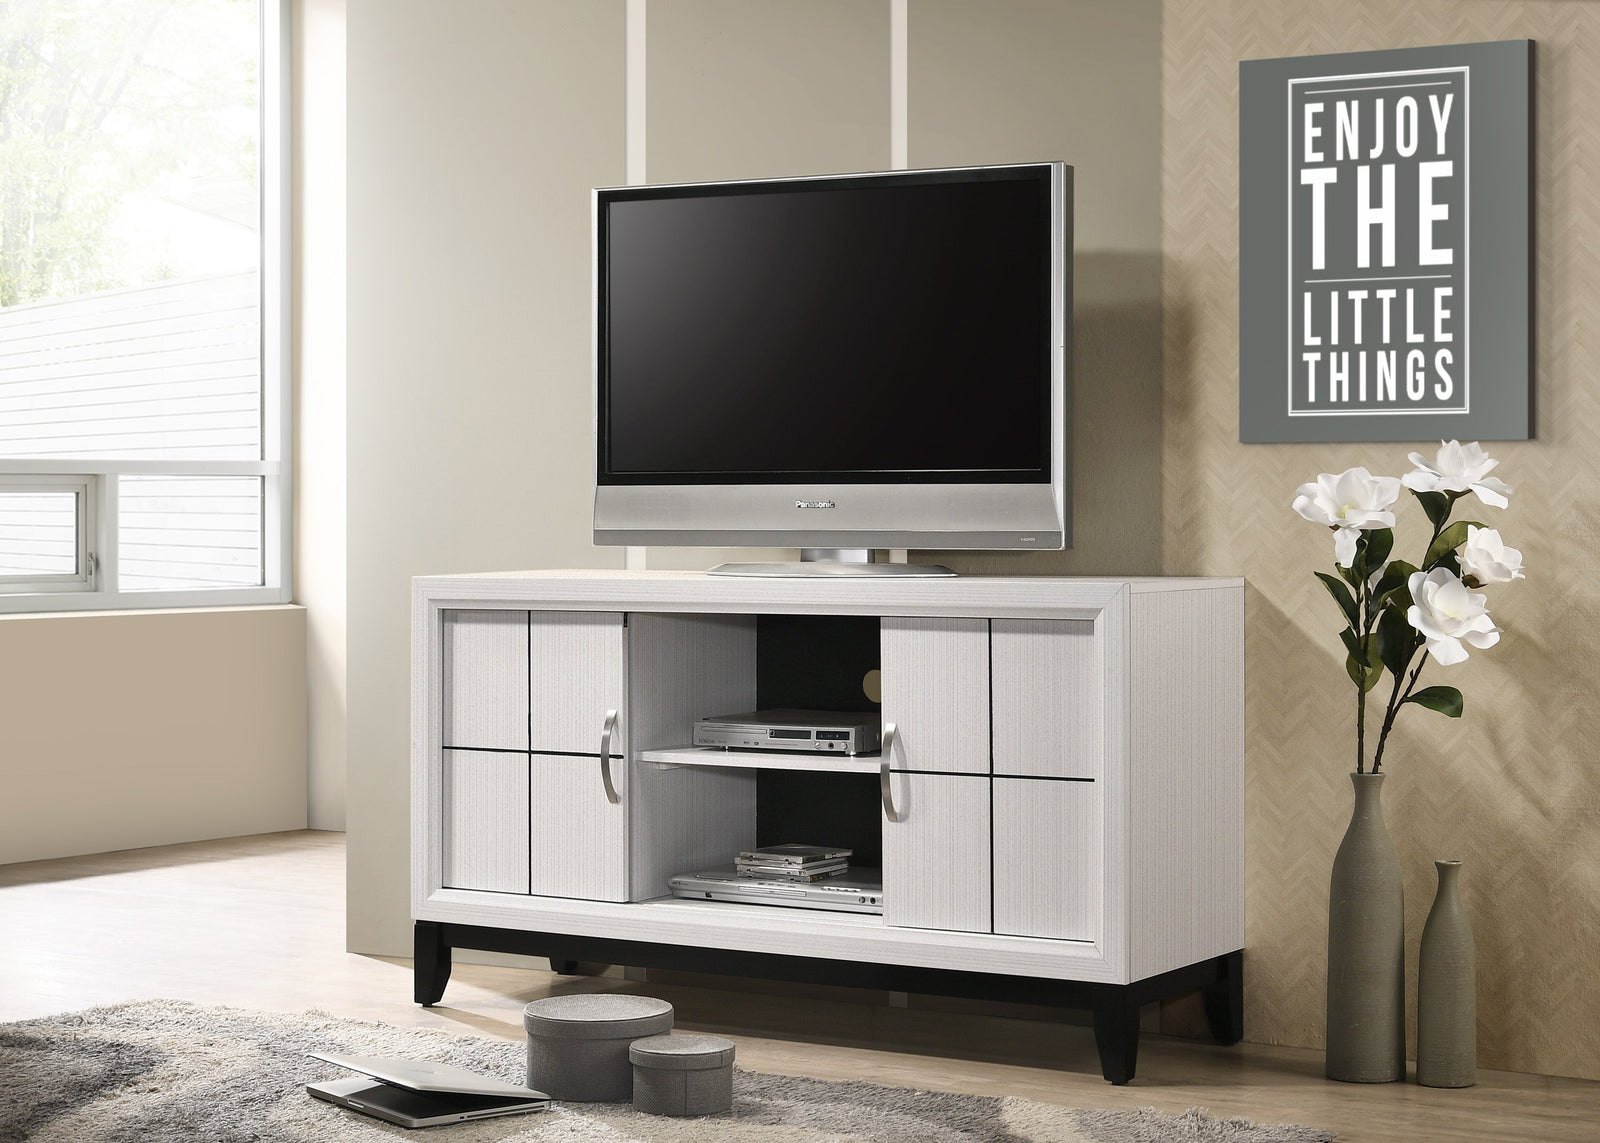 Akerson Chalk Tv Stand Drift Wood, Driftwood Entertainment Console With Metal Legs With Storage Doors for Living Room